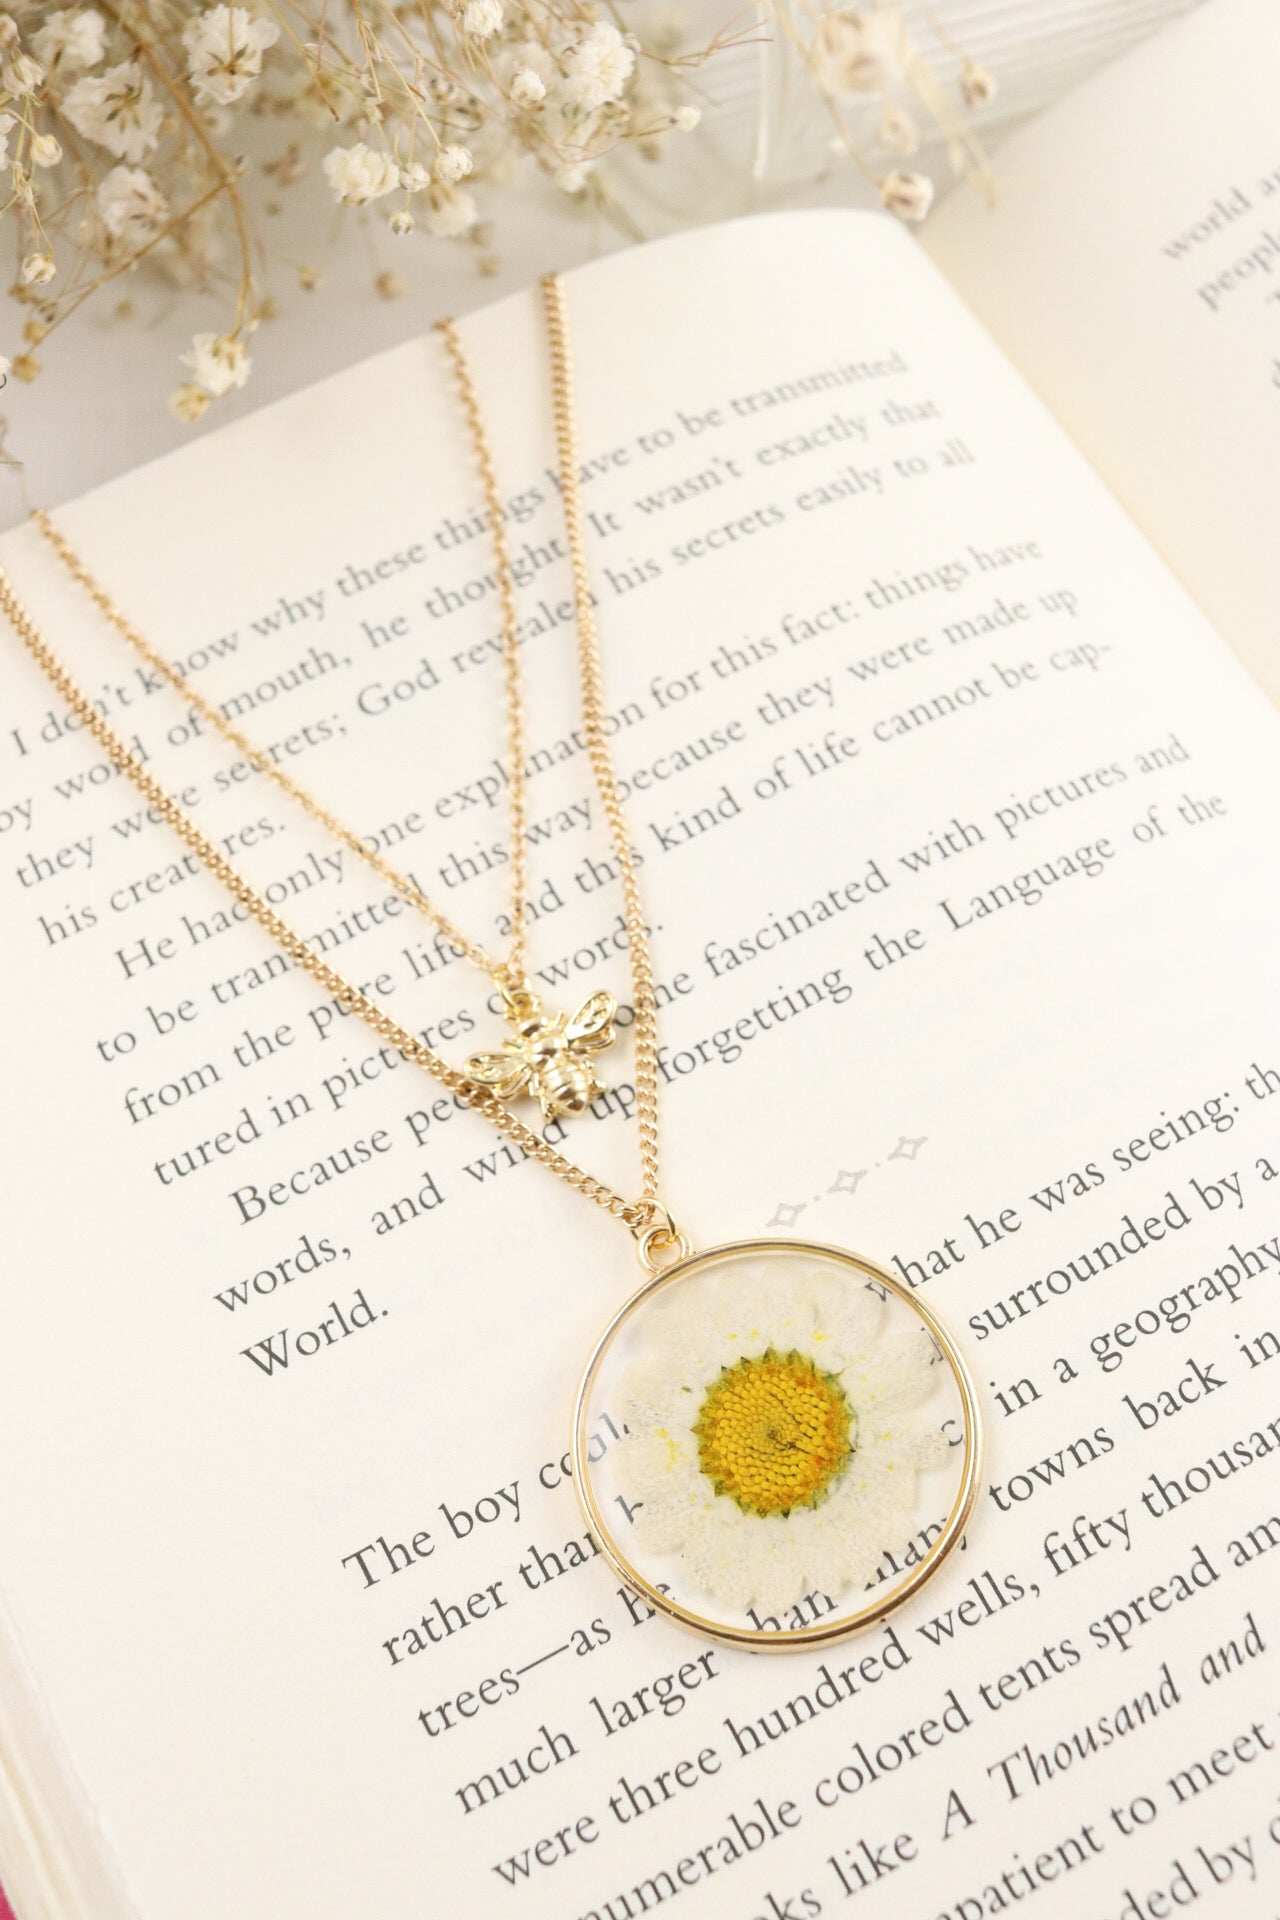 White Daisy Wildflower Necklace, Bee Charm Necklace, Botanical Nature Resin Necklace Pressed Flower Pendant, Gift For Her